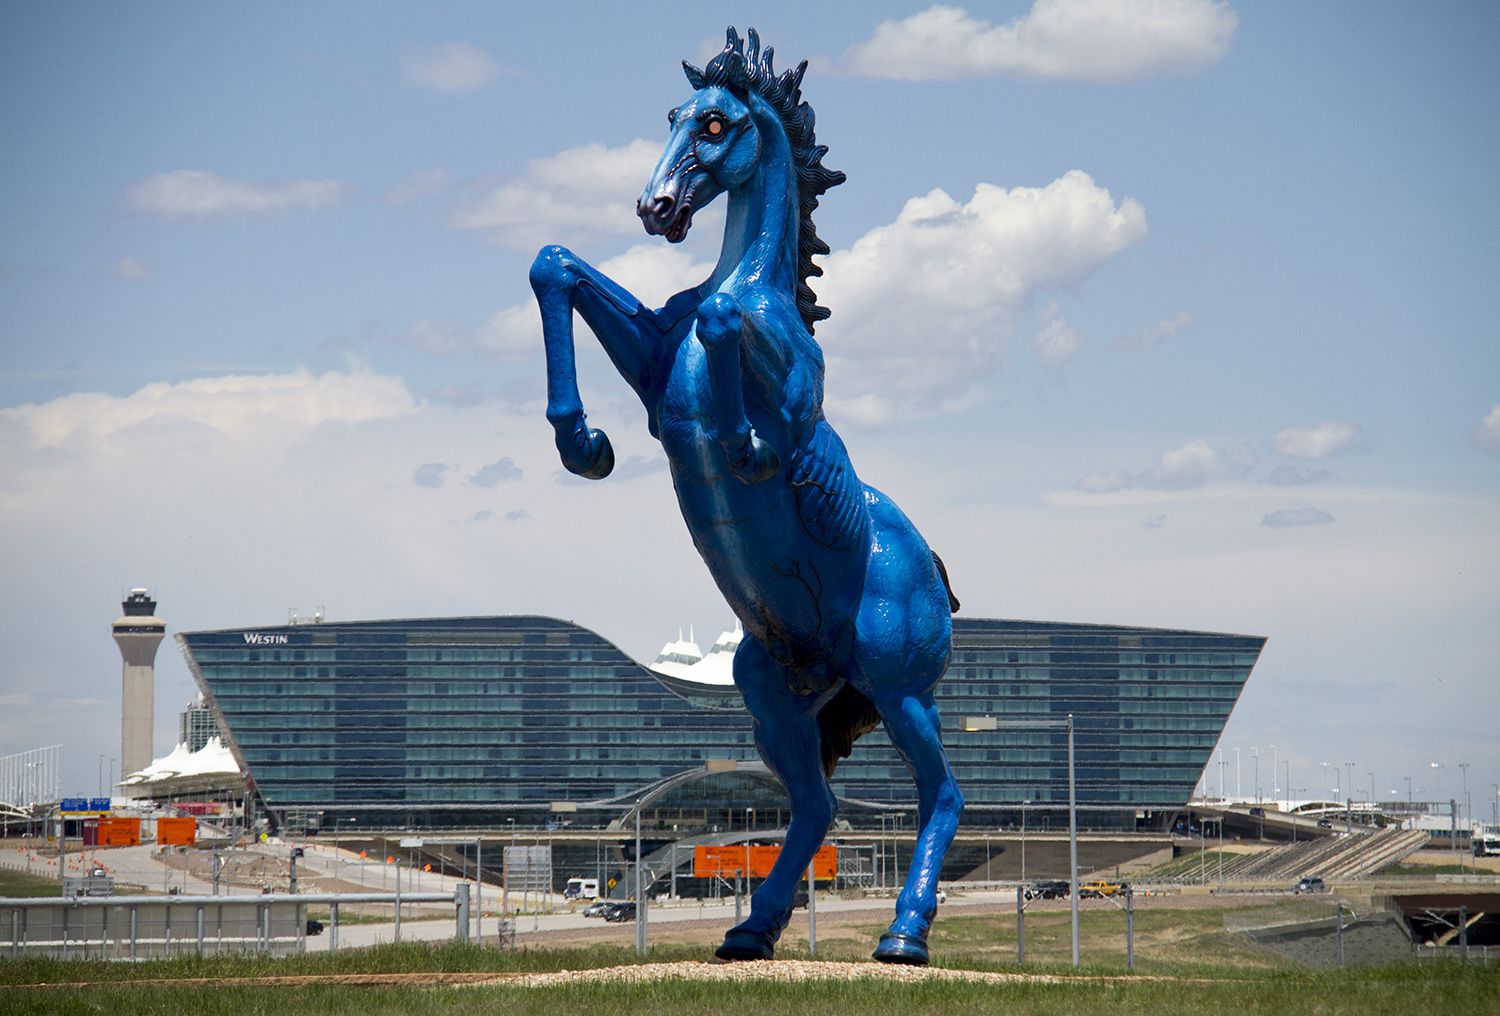 Broncos Mascot 'Bucky' Modeled After One of America's Most Iconic Horses